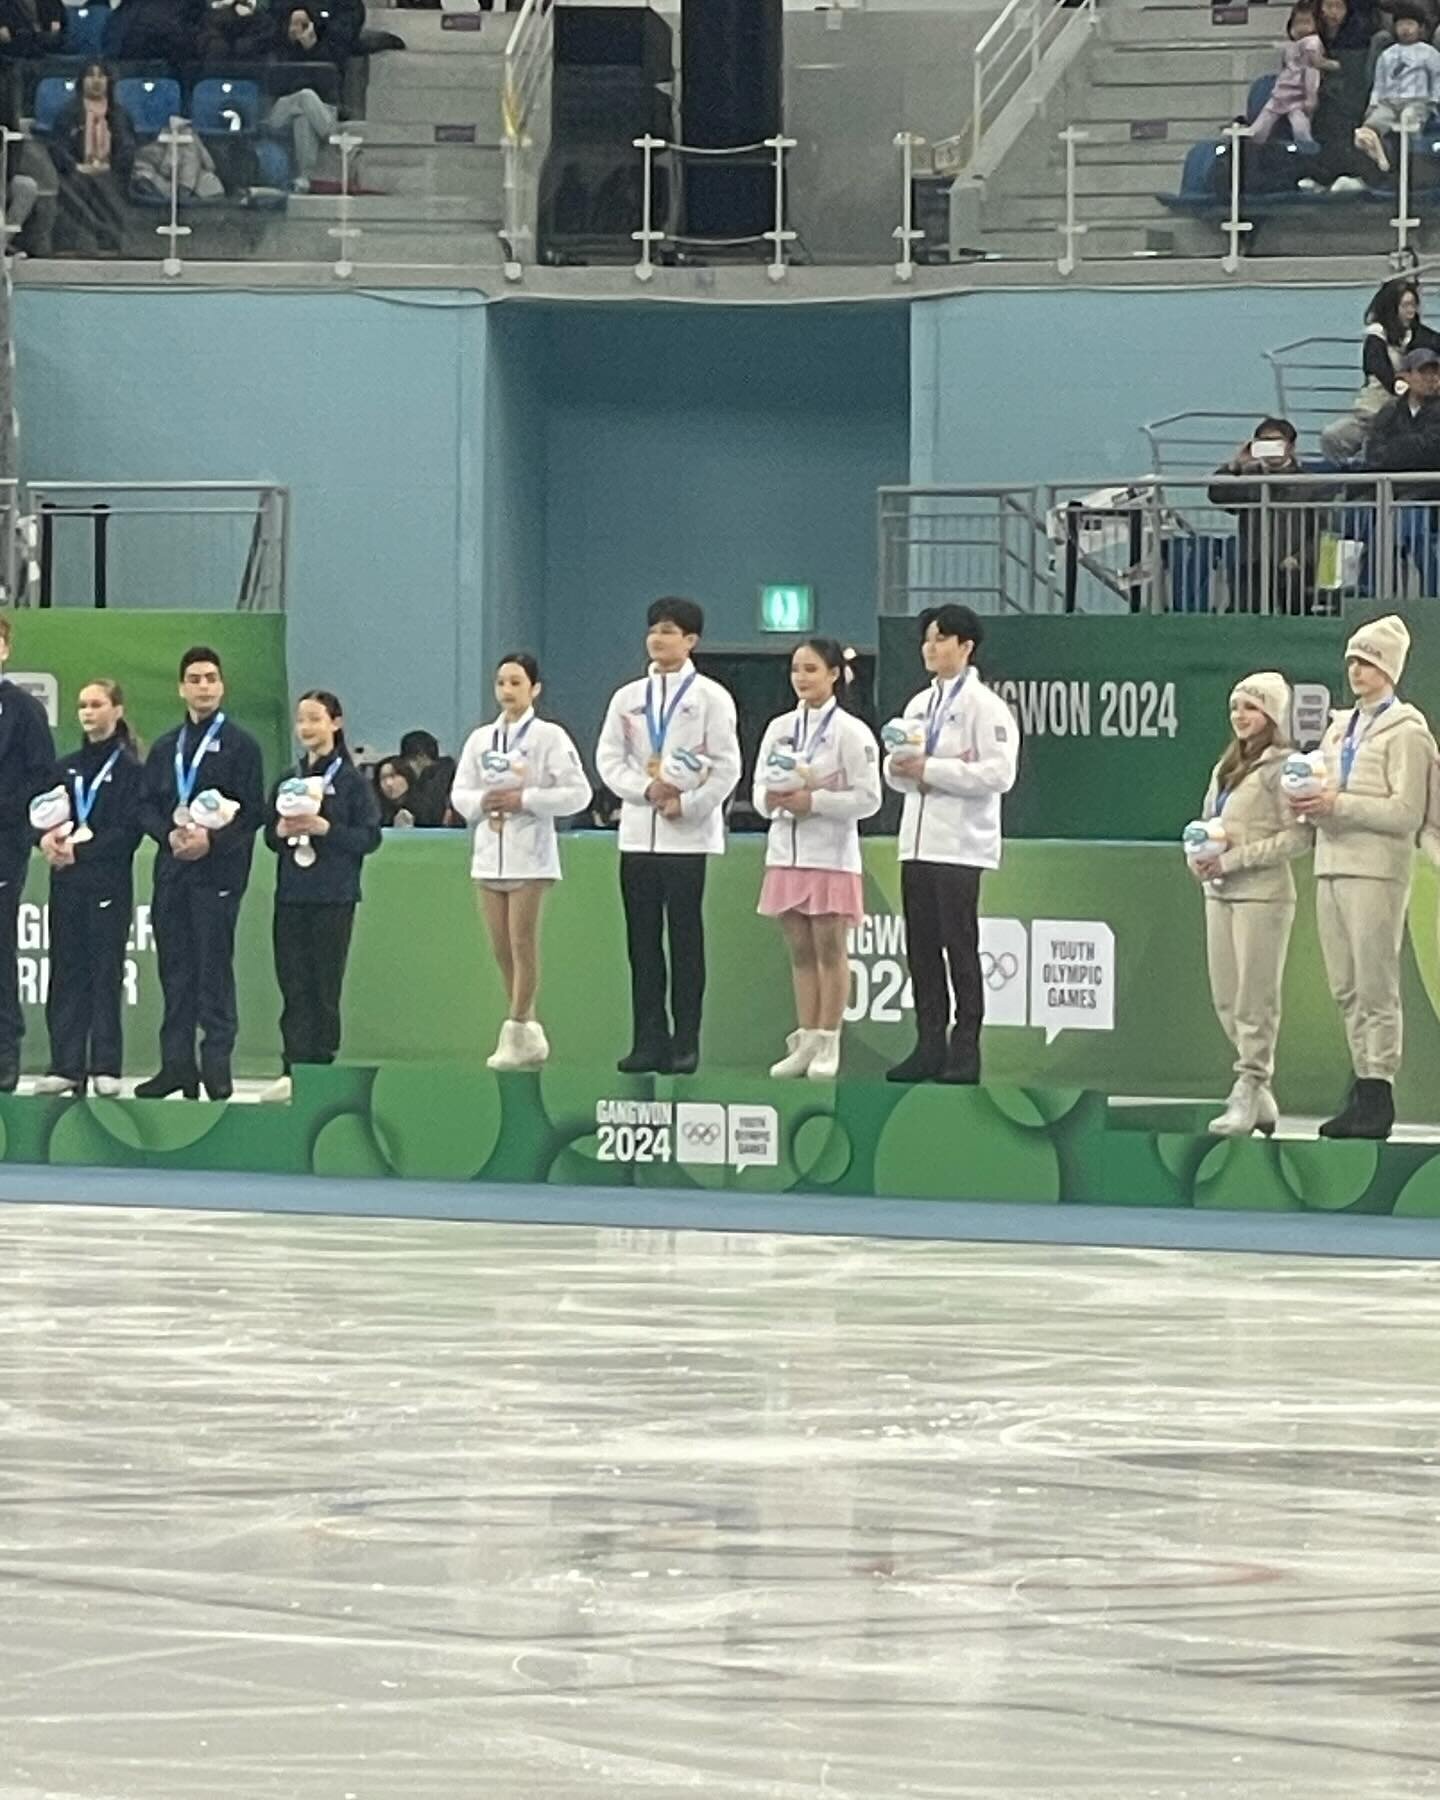 What a difference a day makes.  Congrats to Jinny and Namu and Team Korea for their Gold medal in the Team Event😀 #teamkorea #gangwon2024 #vancouvericedance